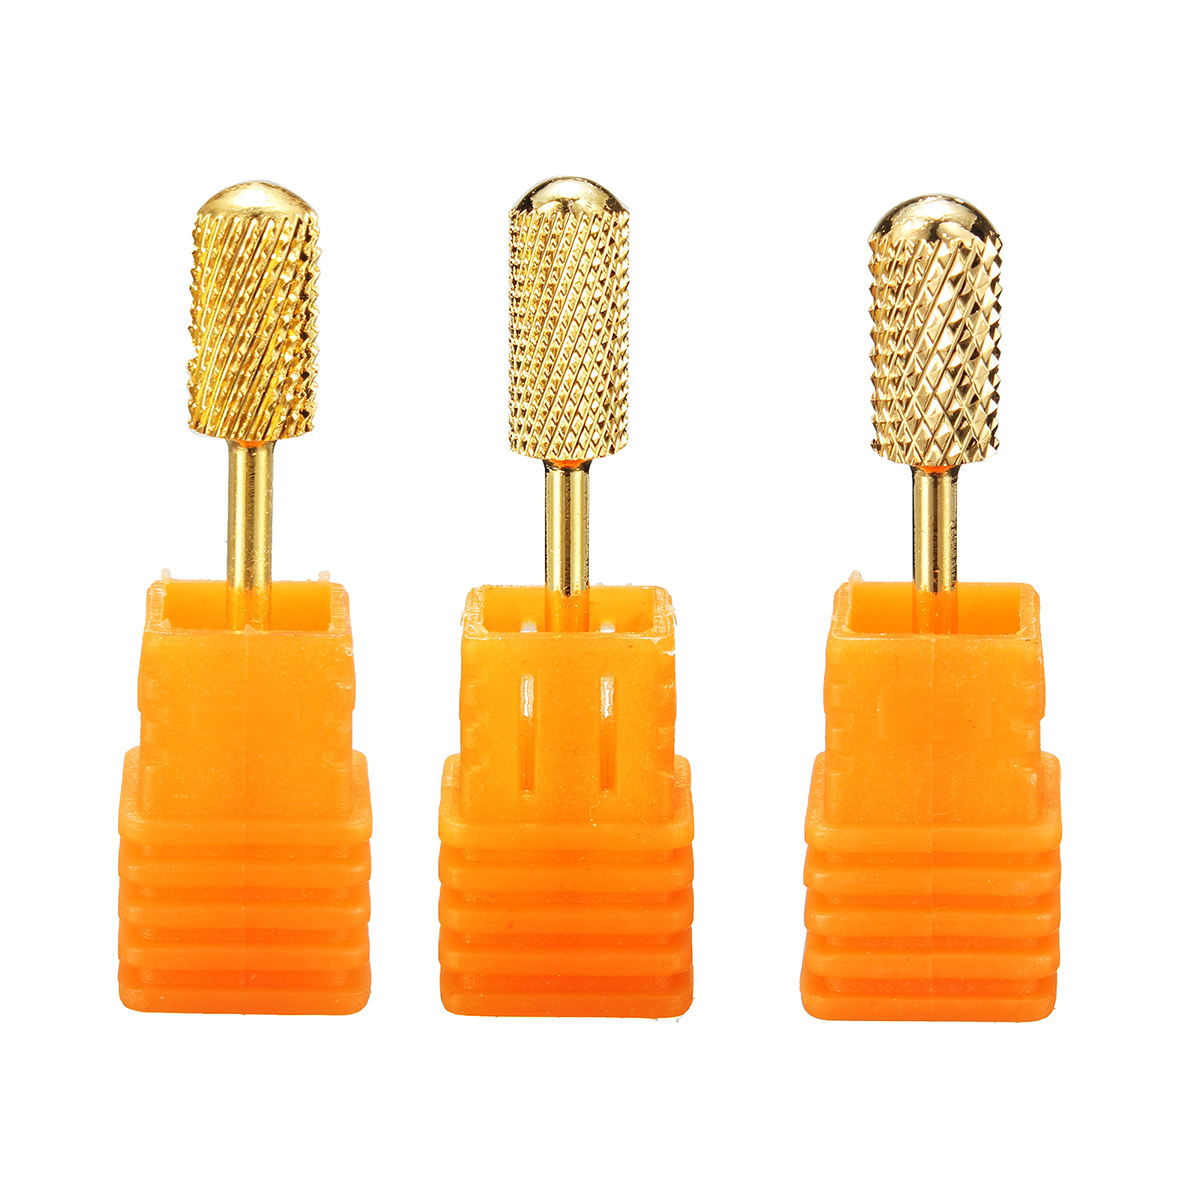 235mm-Gold-Tungsten-Steel-Nail-Drill-Bit-Electric-Machine-Tool-Manicure-Grinding-Polish-1123216